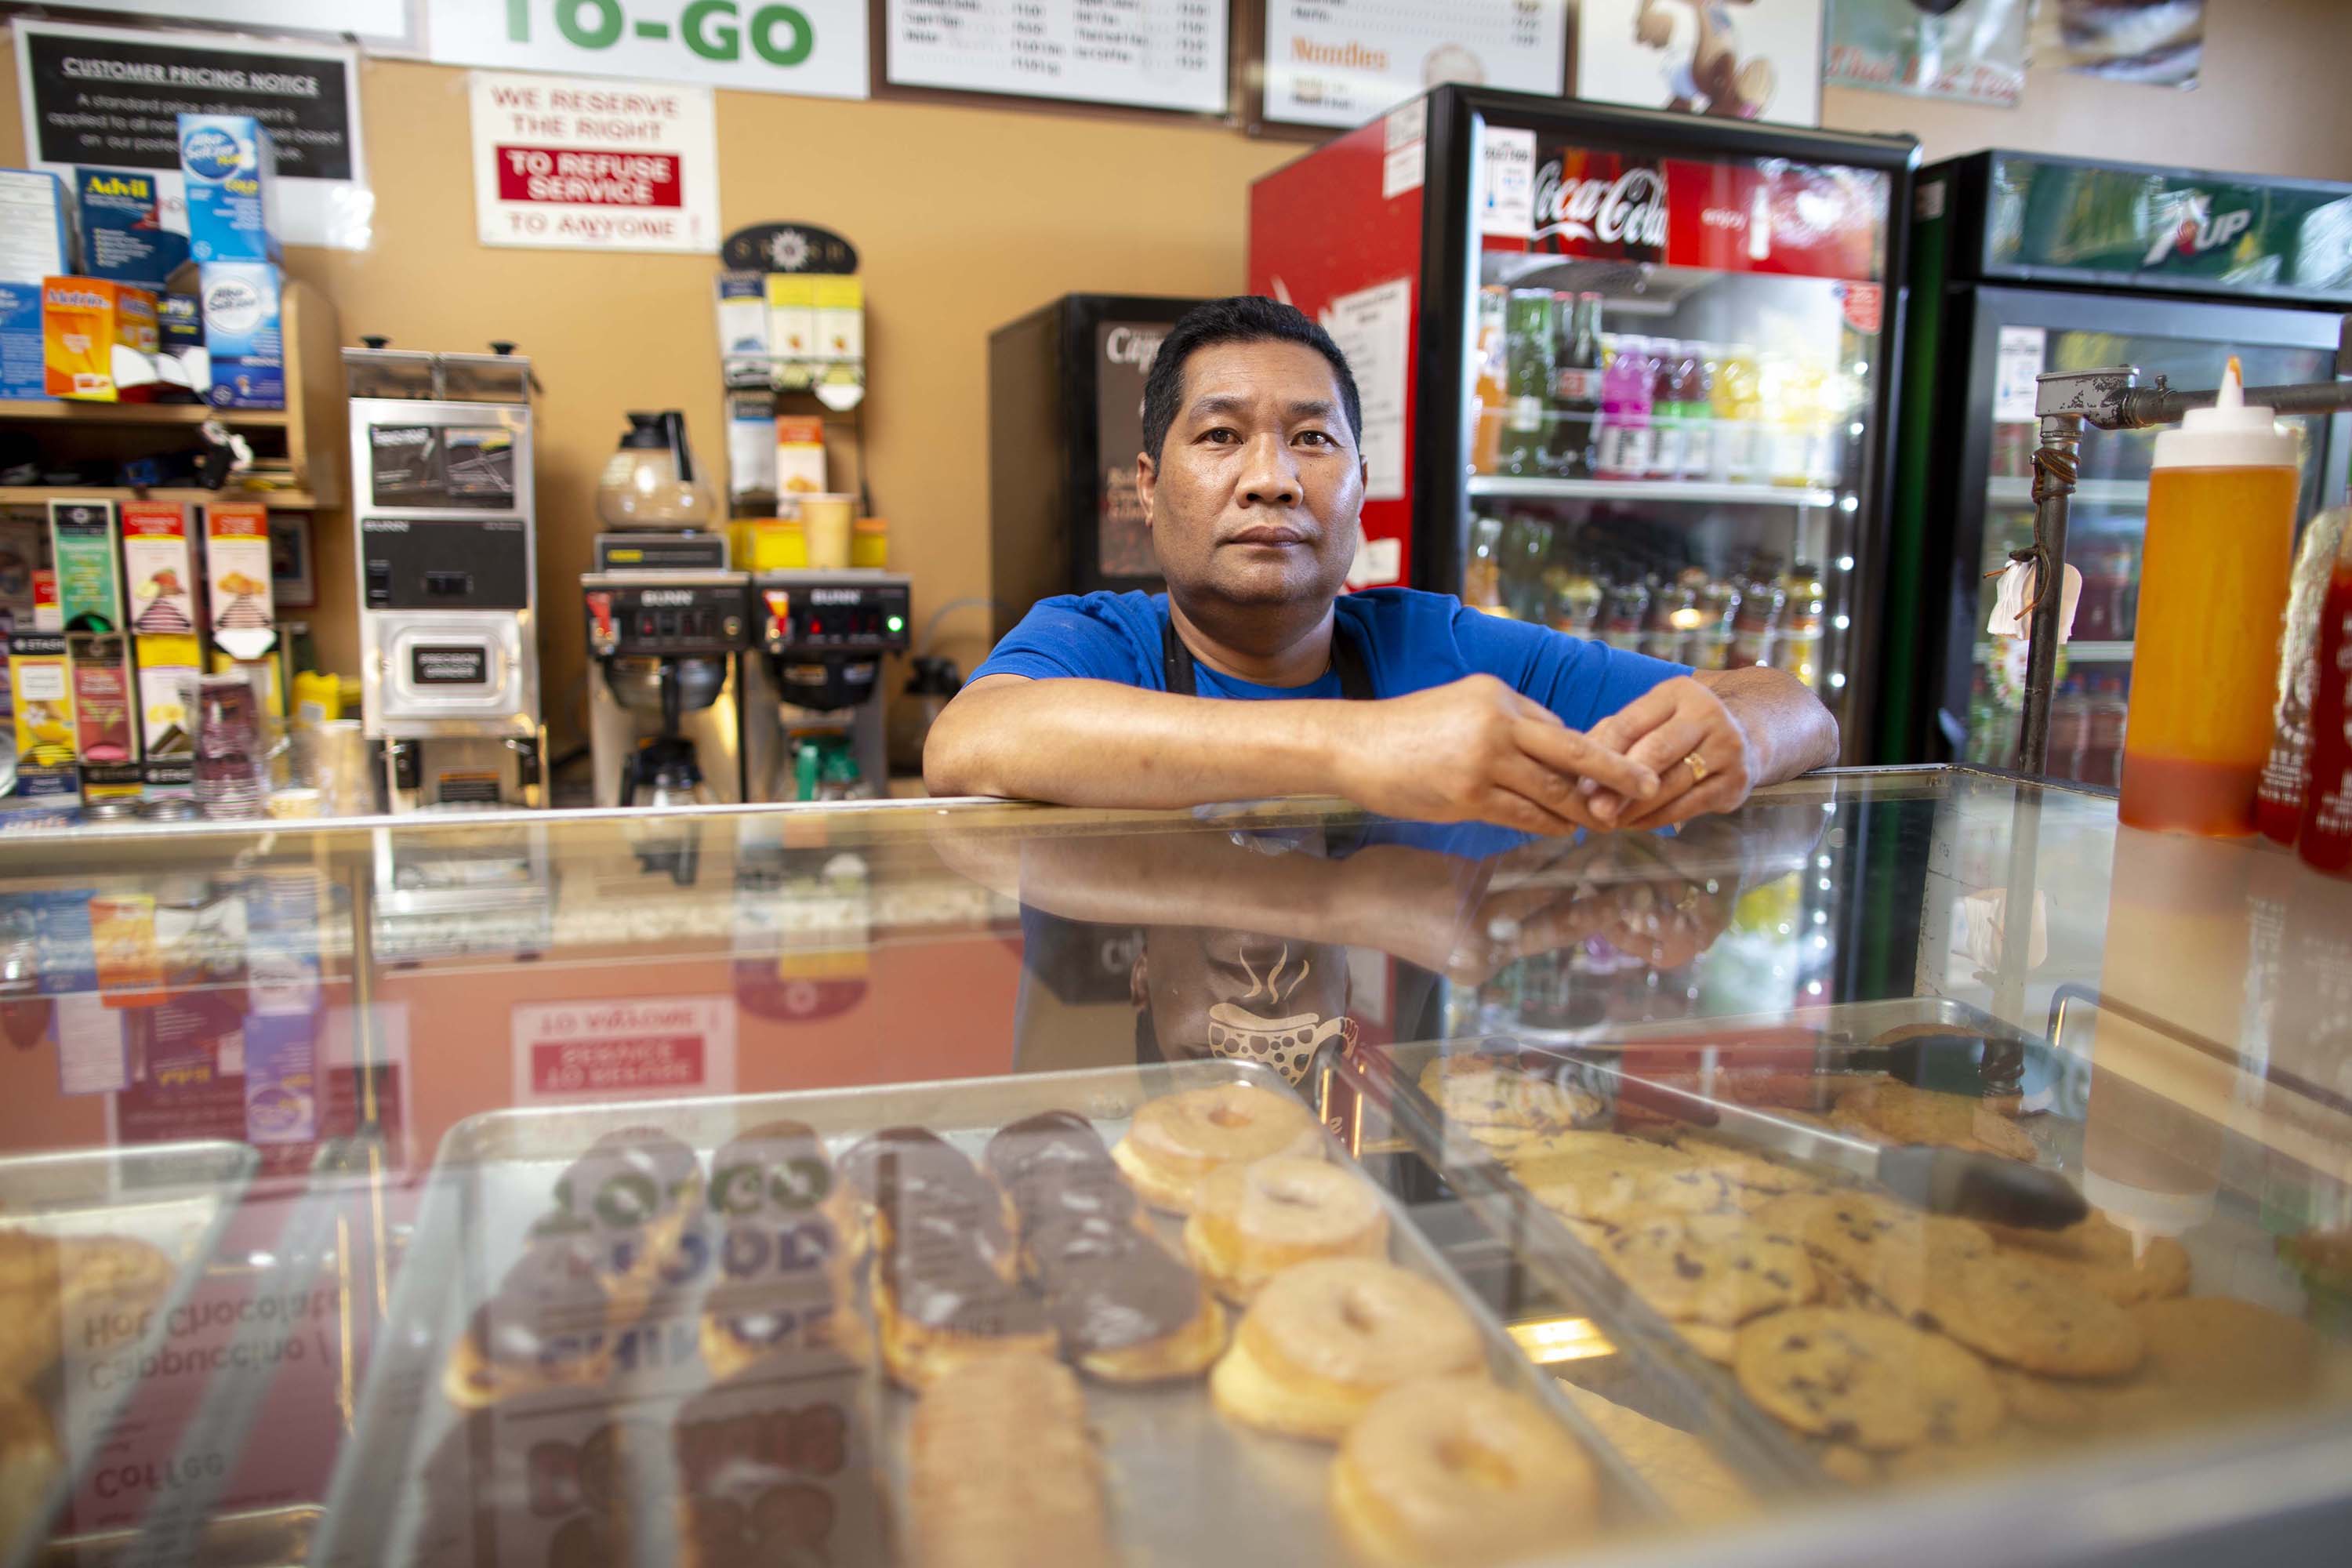 Timothy Mom has been running his donut shop since 1990. He pays his landlord $135 a month for property taxes.